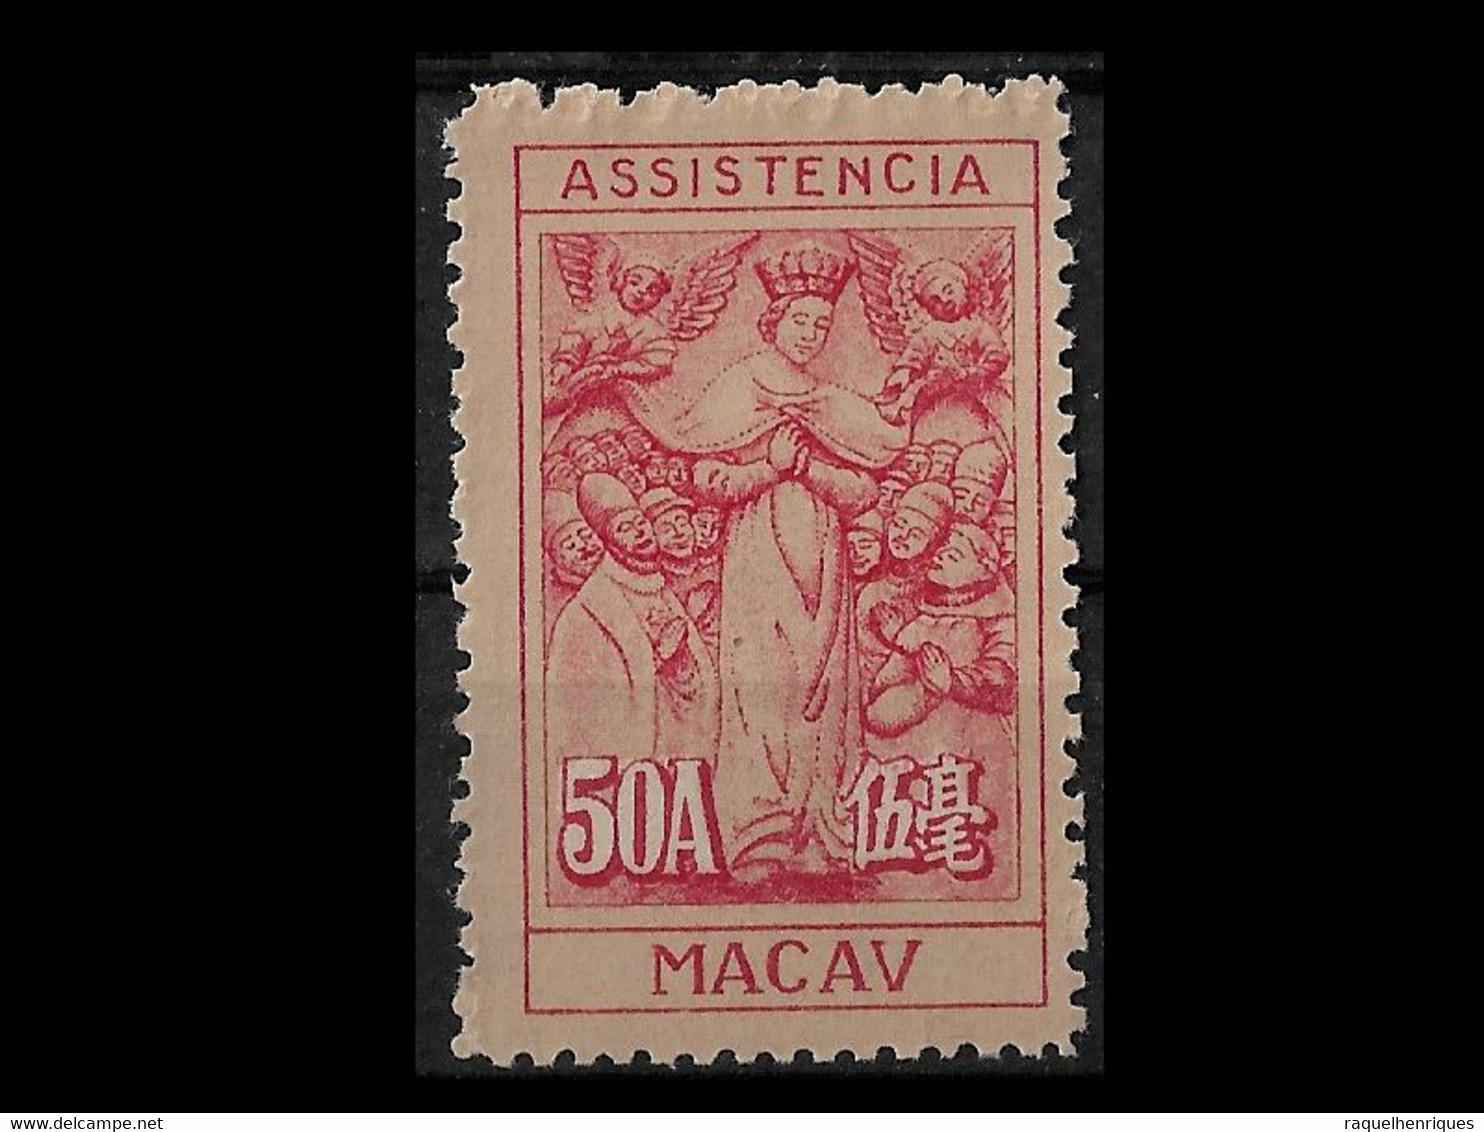 MACAU STAMP - 1953-56 Symbol Of Charity - Inscription "ASSISTENCIA" Perf:10 MNH (BA5#314) - Postage Due